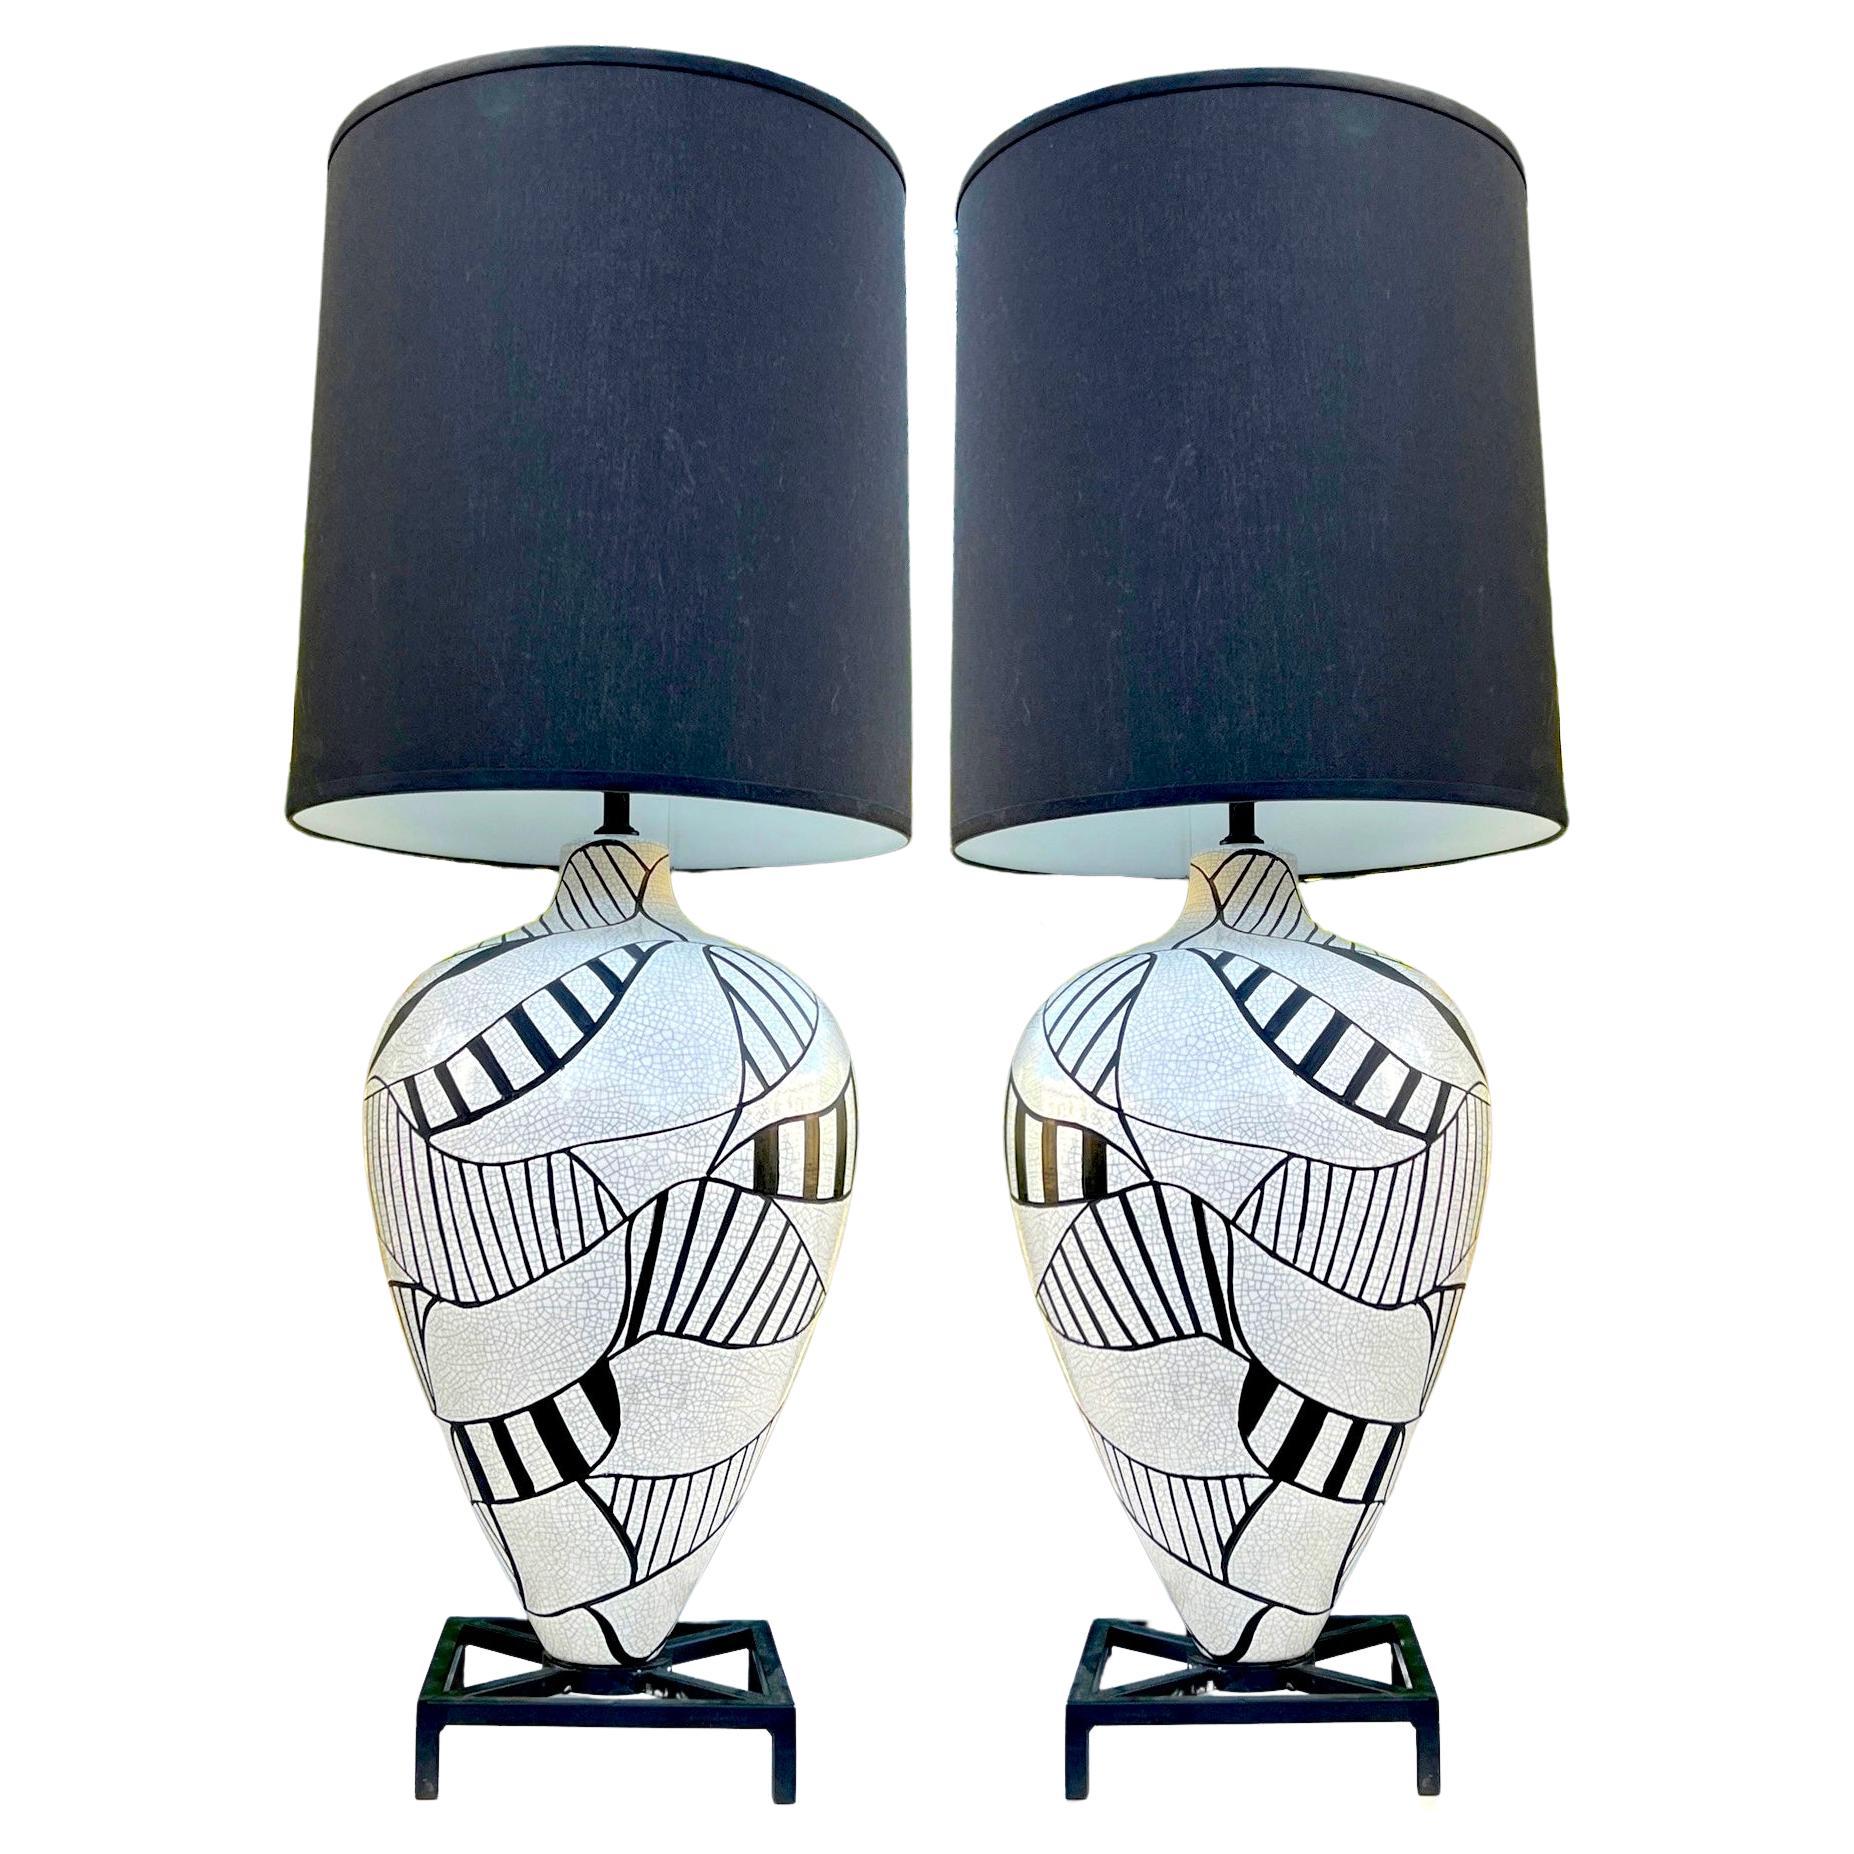 Pair of Black & White Geometric Pottery Lamps in the Style Roger Capron, 1980's For Sale